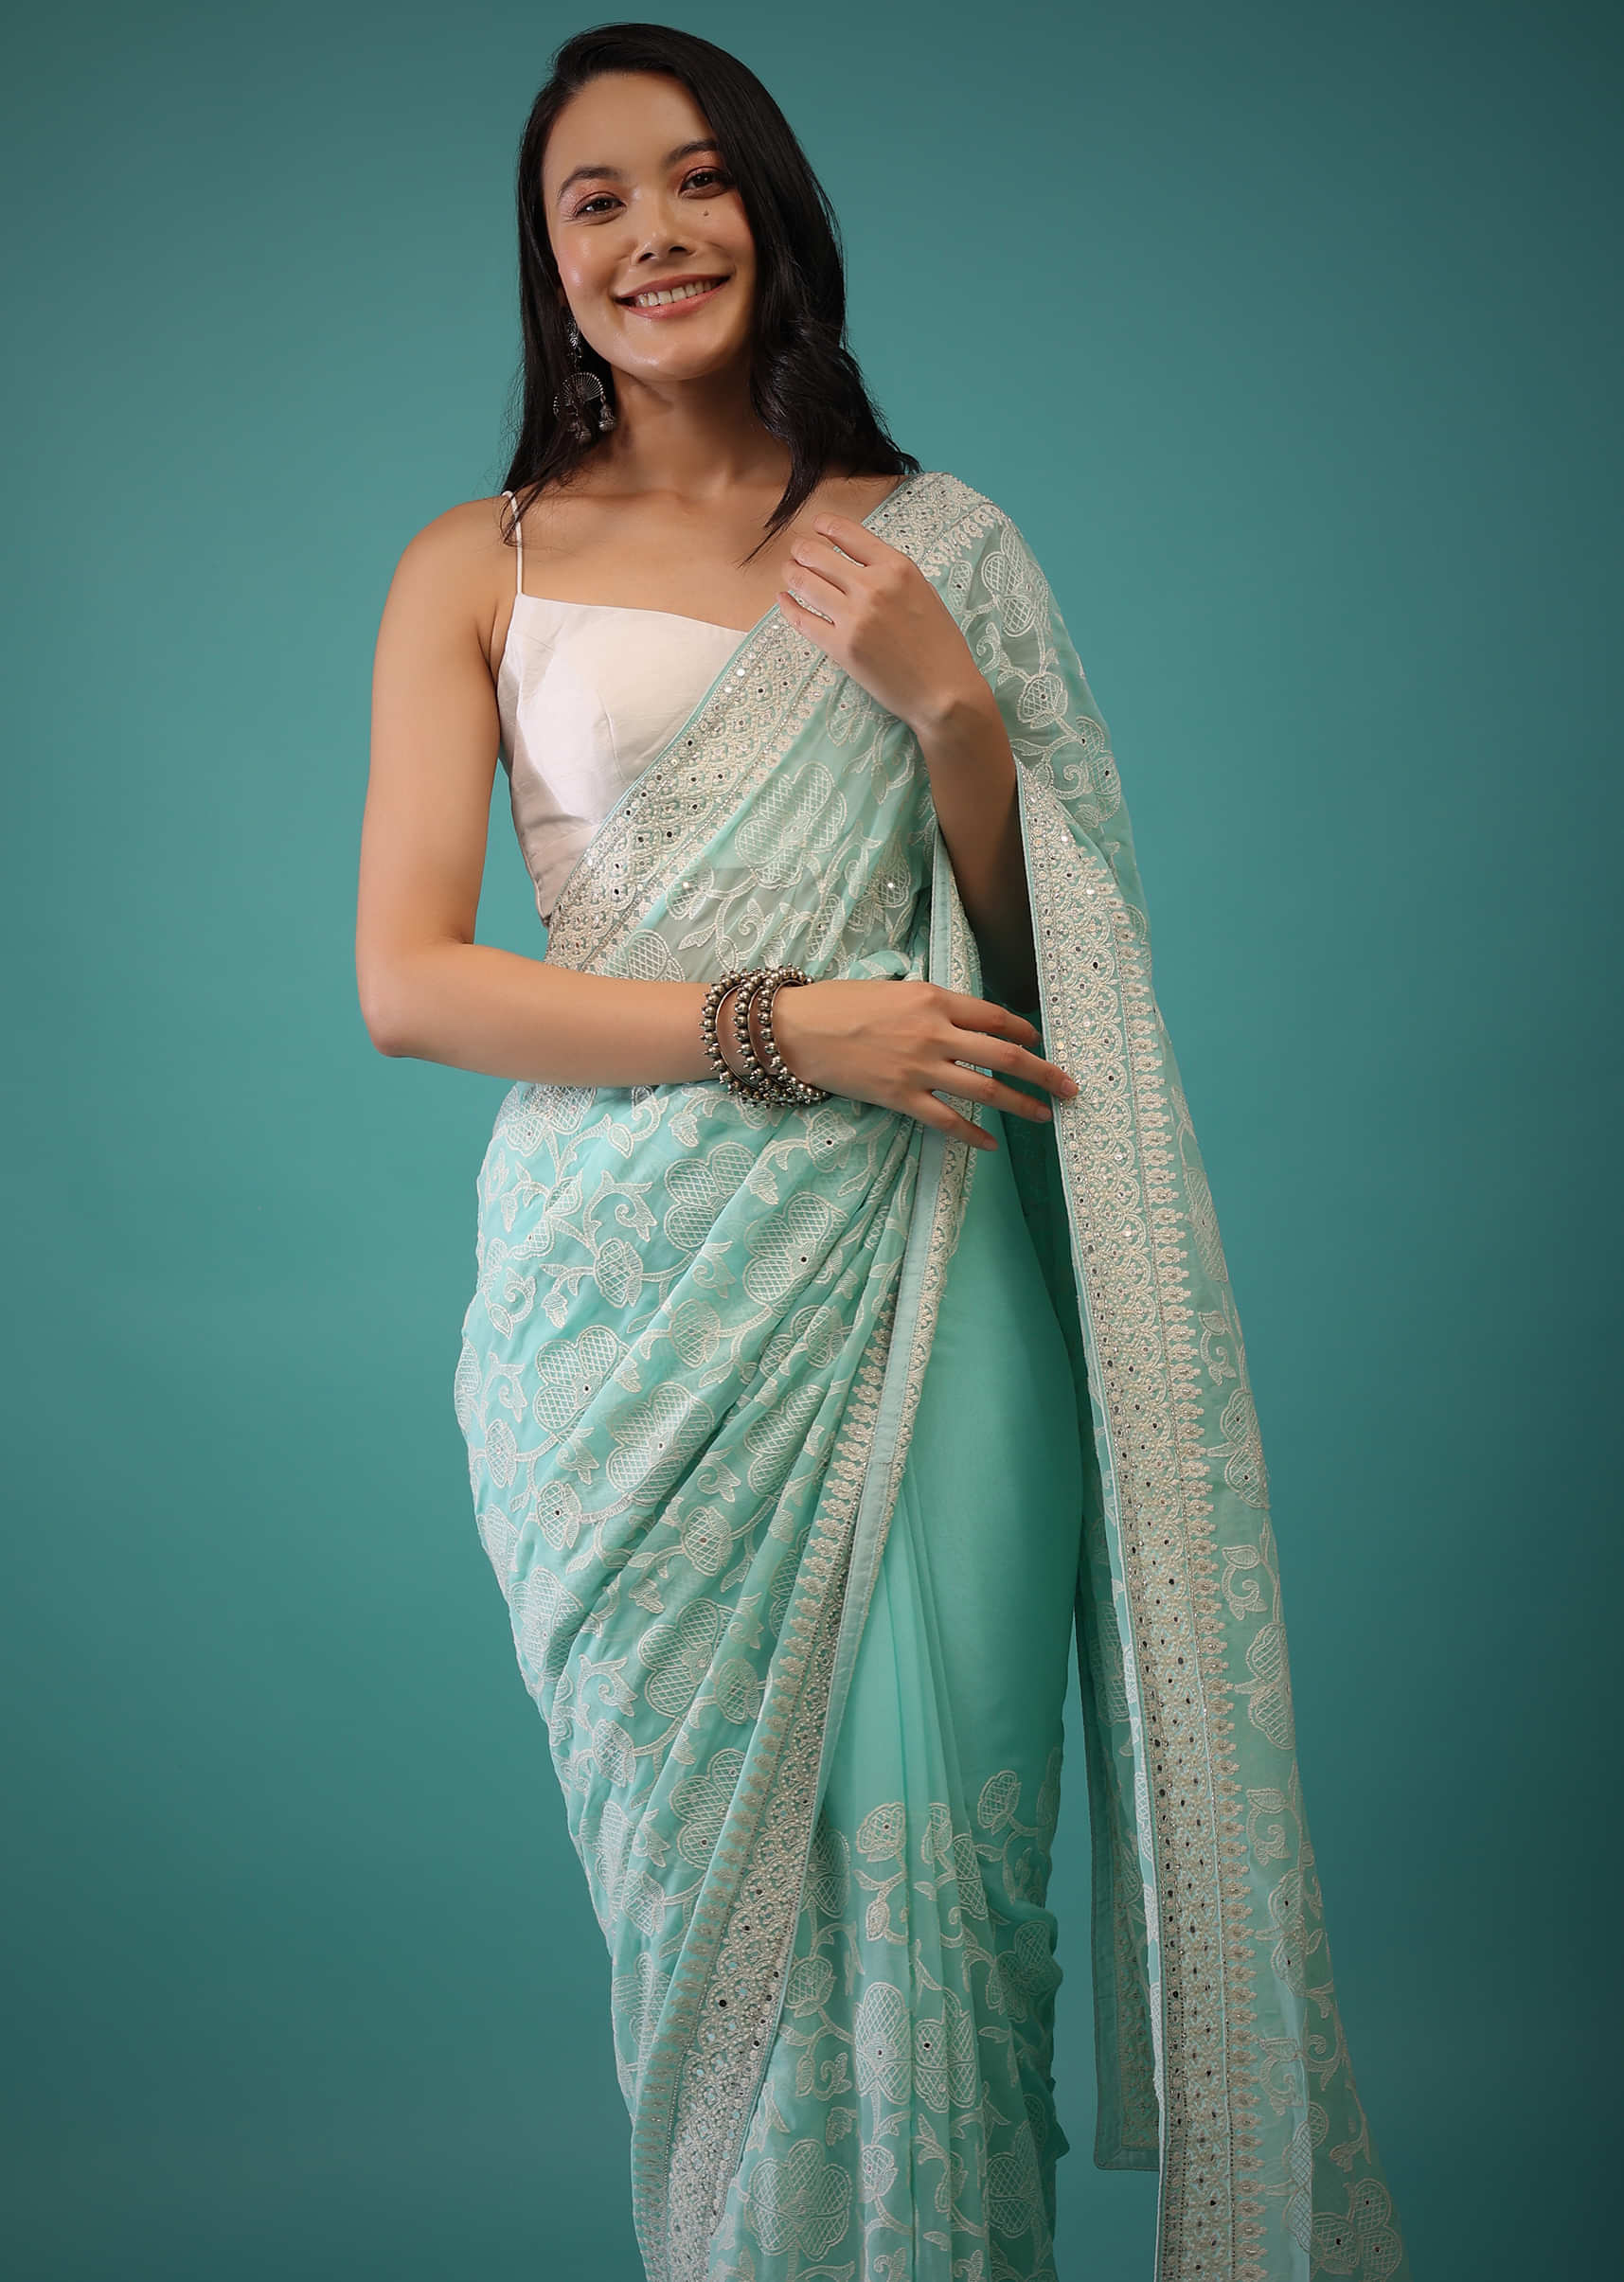 Mint Green Lucknowi Saree With Mirrored Work, White Beads Embroidery Buttis All Over